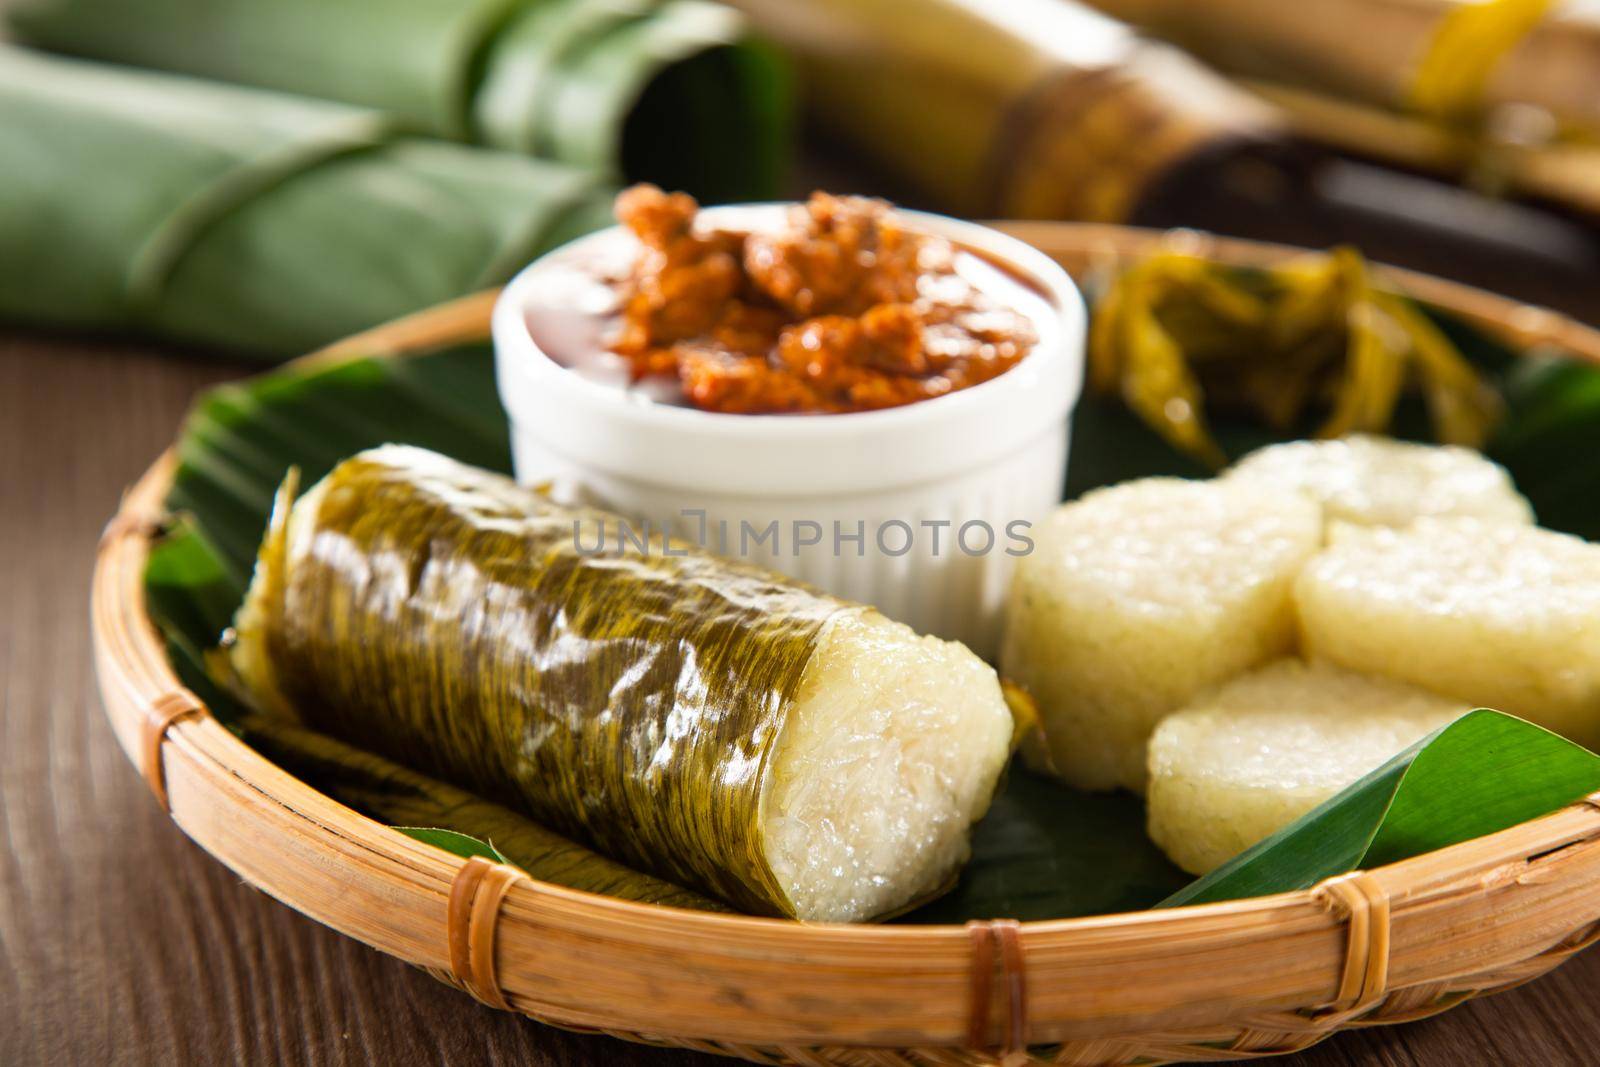 Glutinous rice is wrapped with lerek or banana leaf encased in bamboo culm and cooked in open fire / Lemang / A must have in every traditional Malay household, eaten with beef or chicken rendang by tehcheesiong